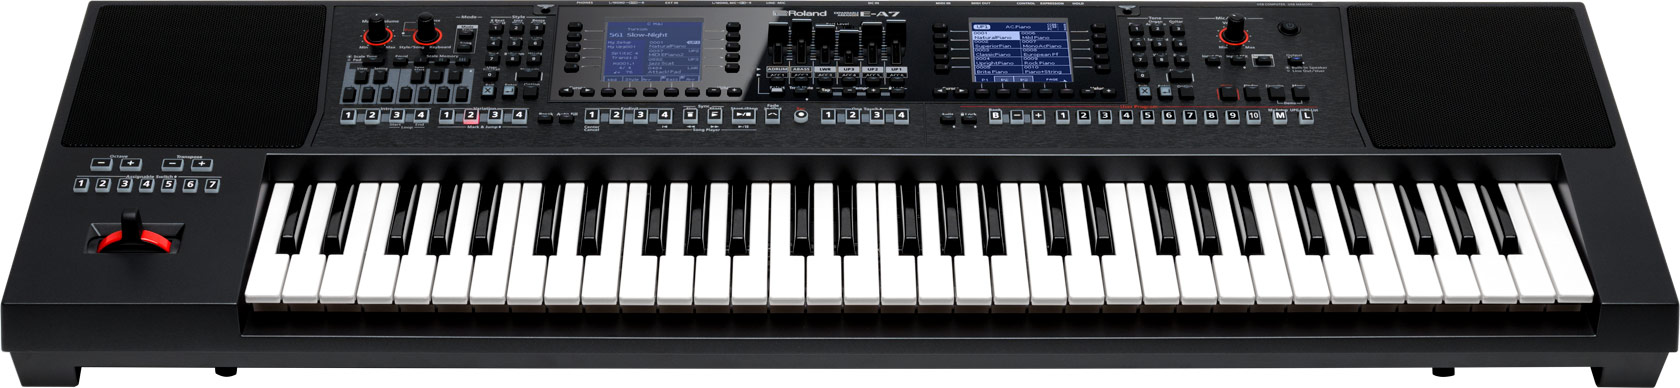 Roland E-a7 Expo - Entertainer Keyboard - Variation 2